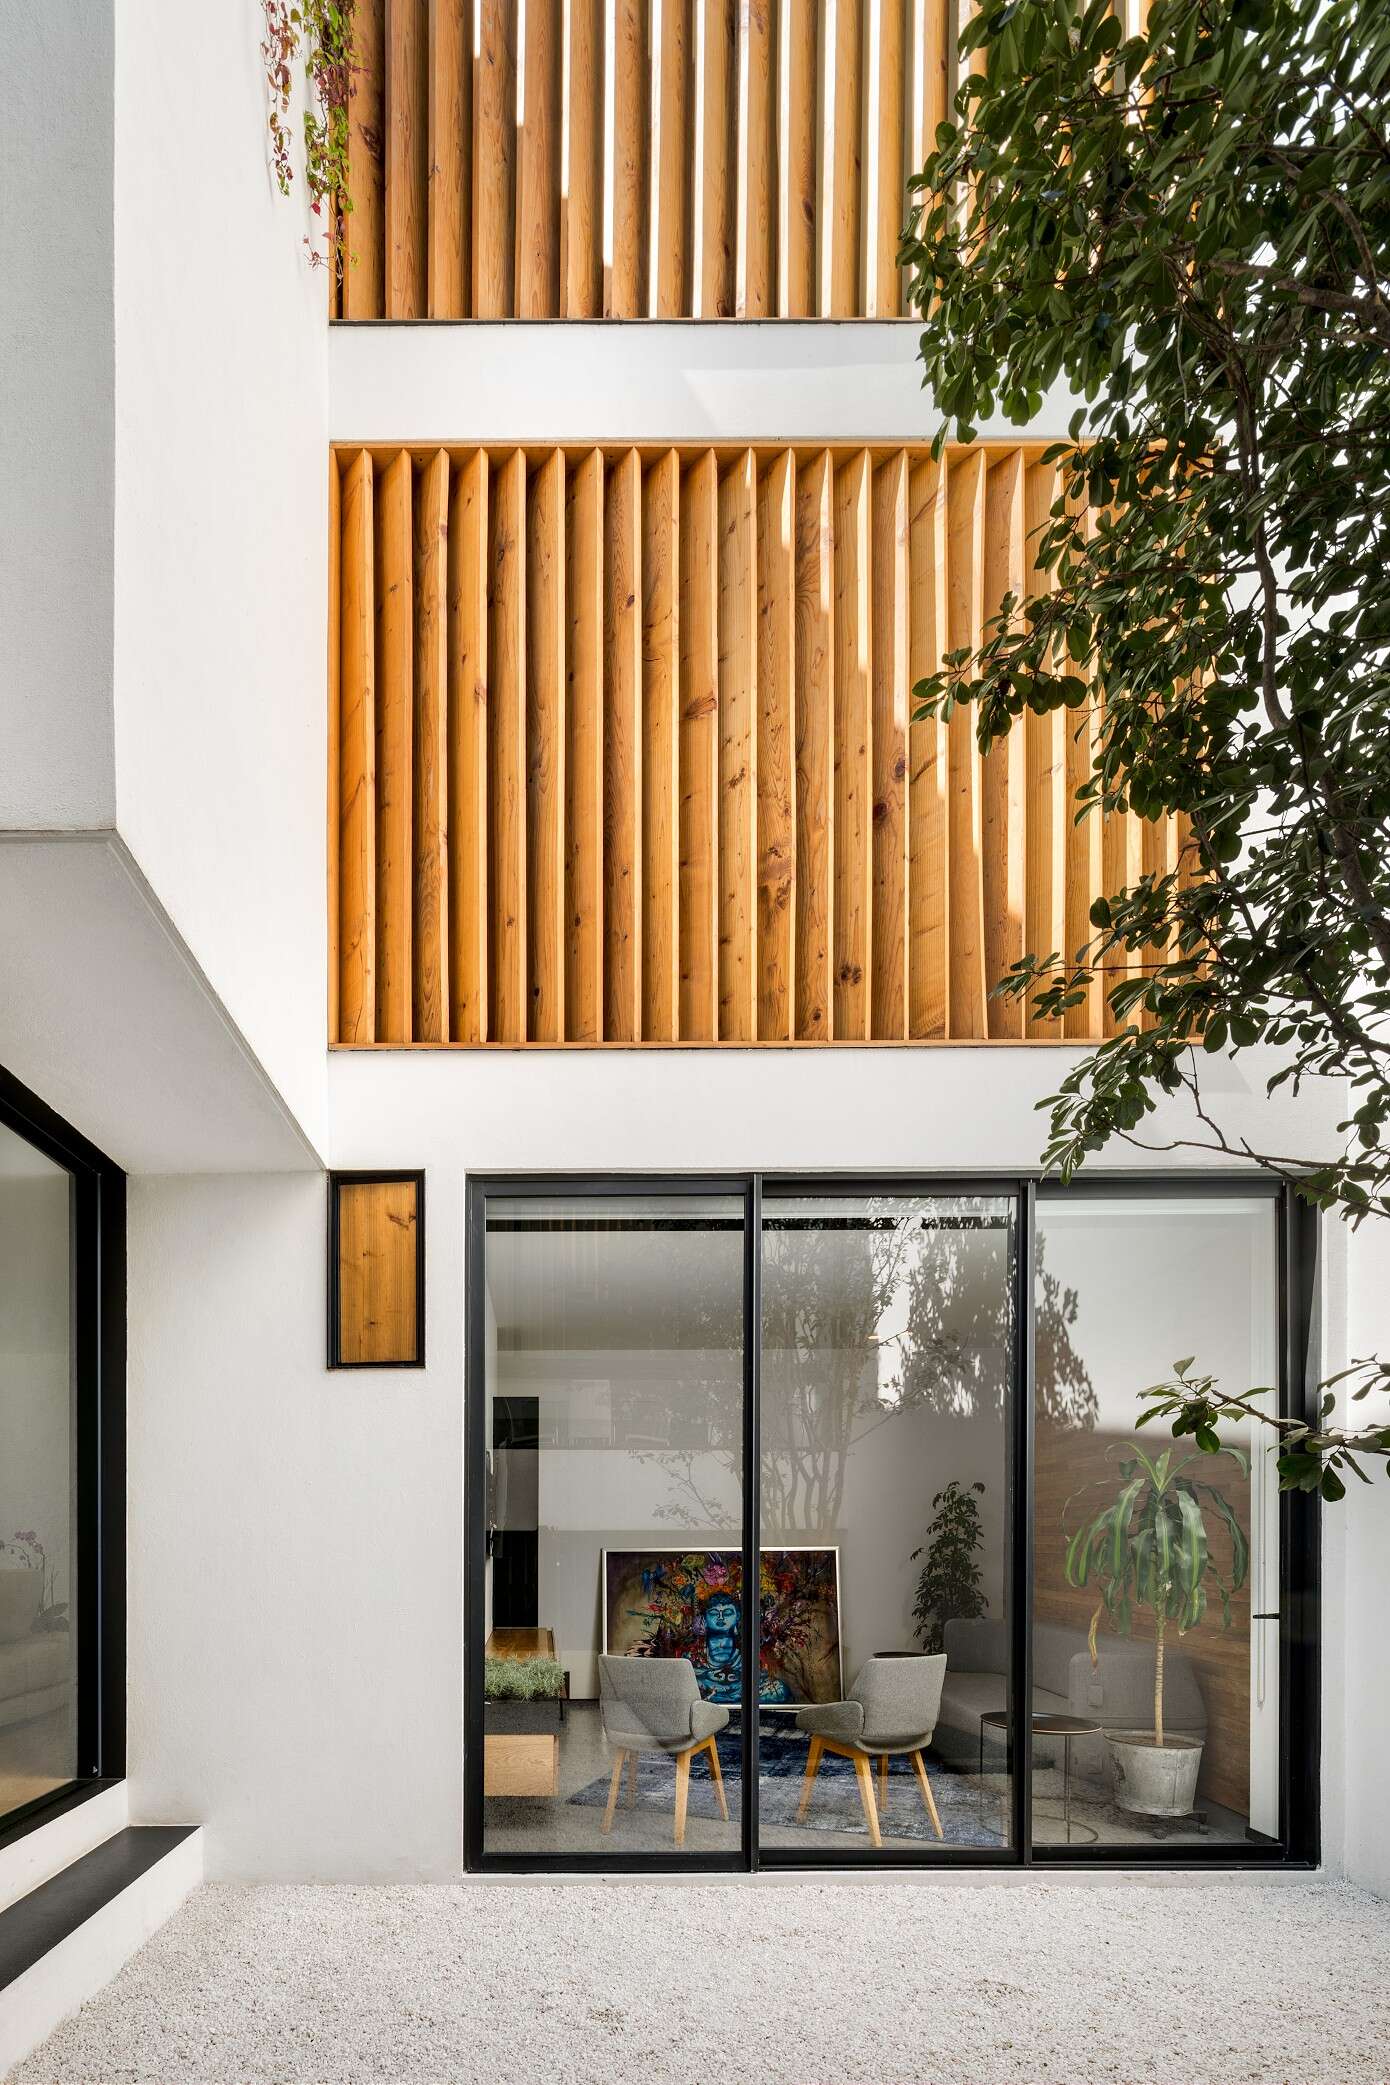 Cachai House by Taller Paralelo